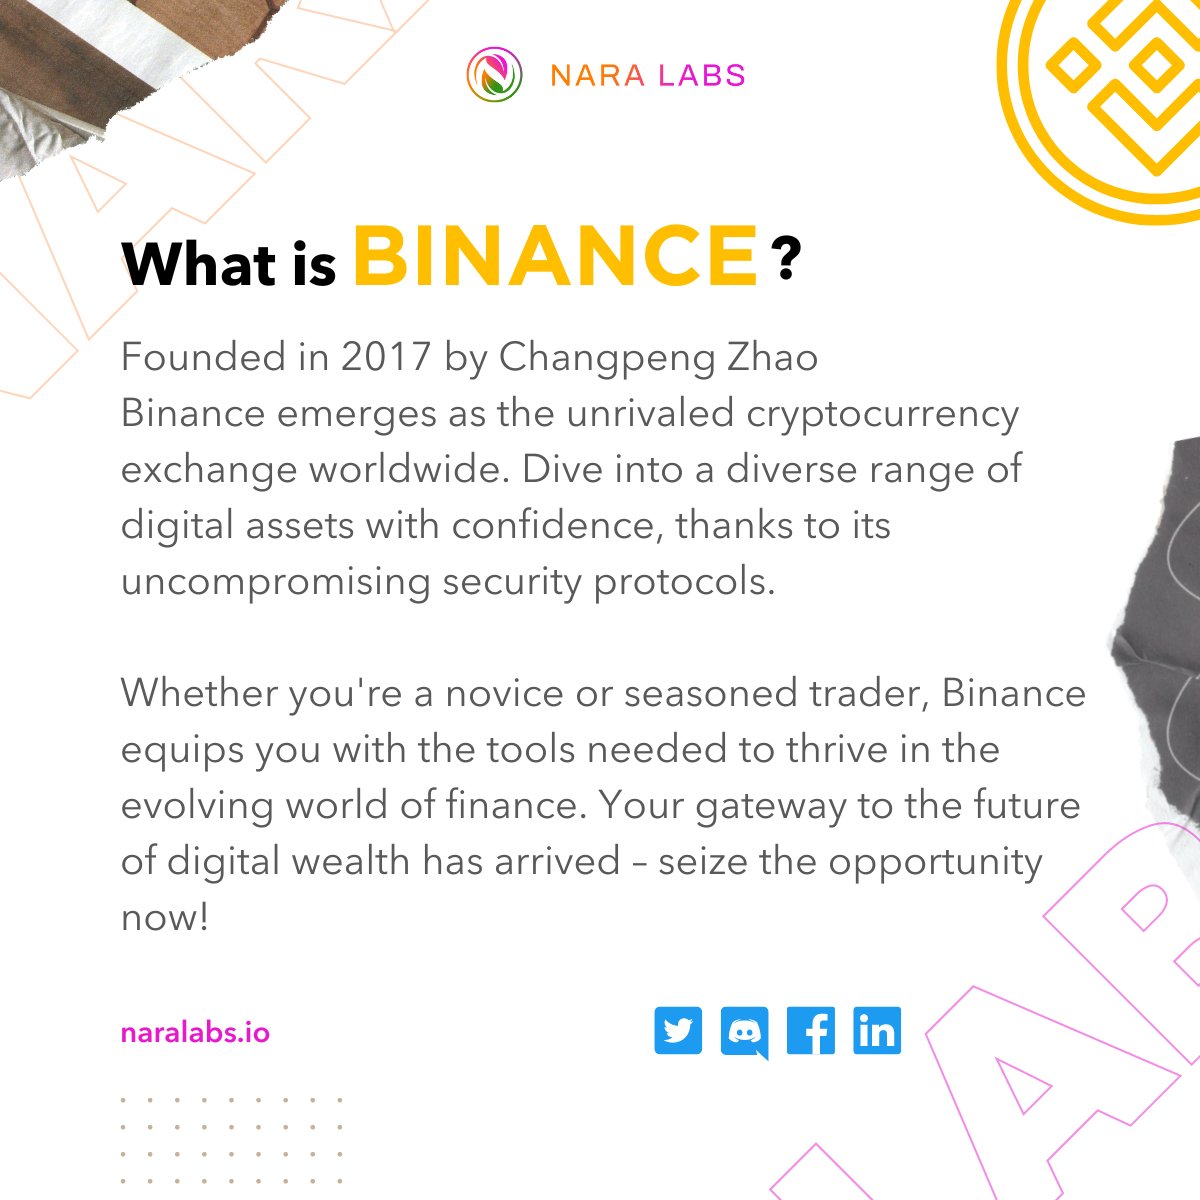 Project of the Week:

@Binance

Join us in spotlighting Binance, a global crypto powerhouse. Discover innovation, security, and endless possibilities.

For more content like this follow us and visit naralabs.io

#ProjectOfTheWeek #Binance #cryptonews #crypto